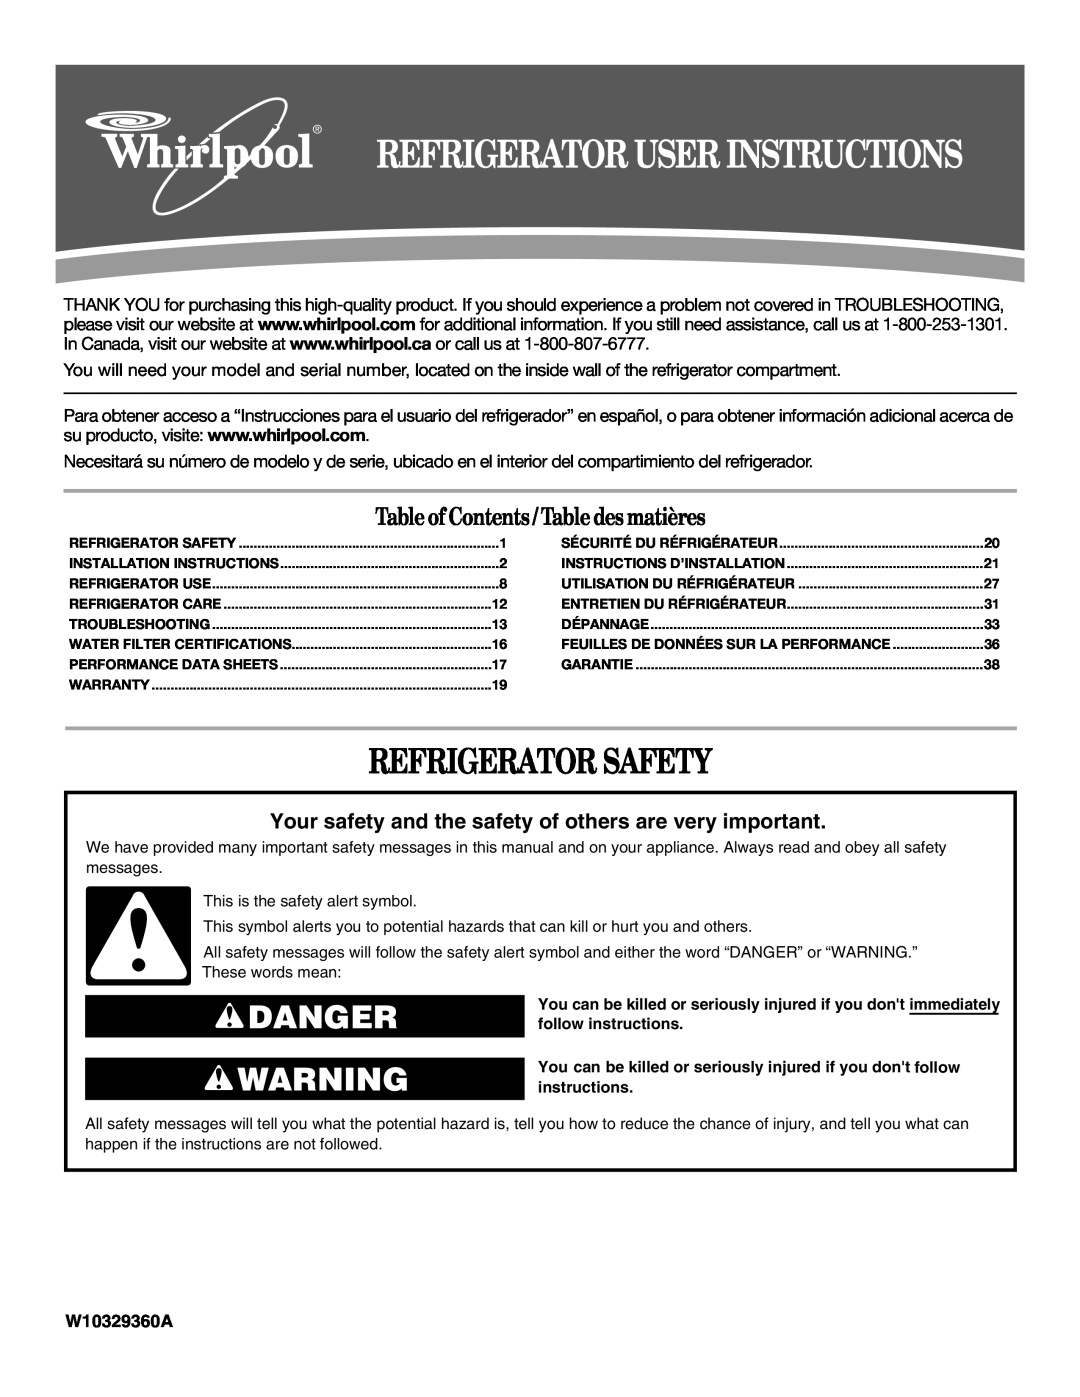 Whirlpool W10329360A installation instructions Refrigerator Safety, Danger, Table of Contents / Table des matières 